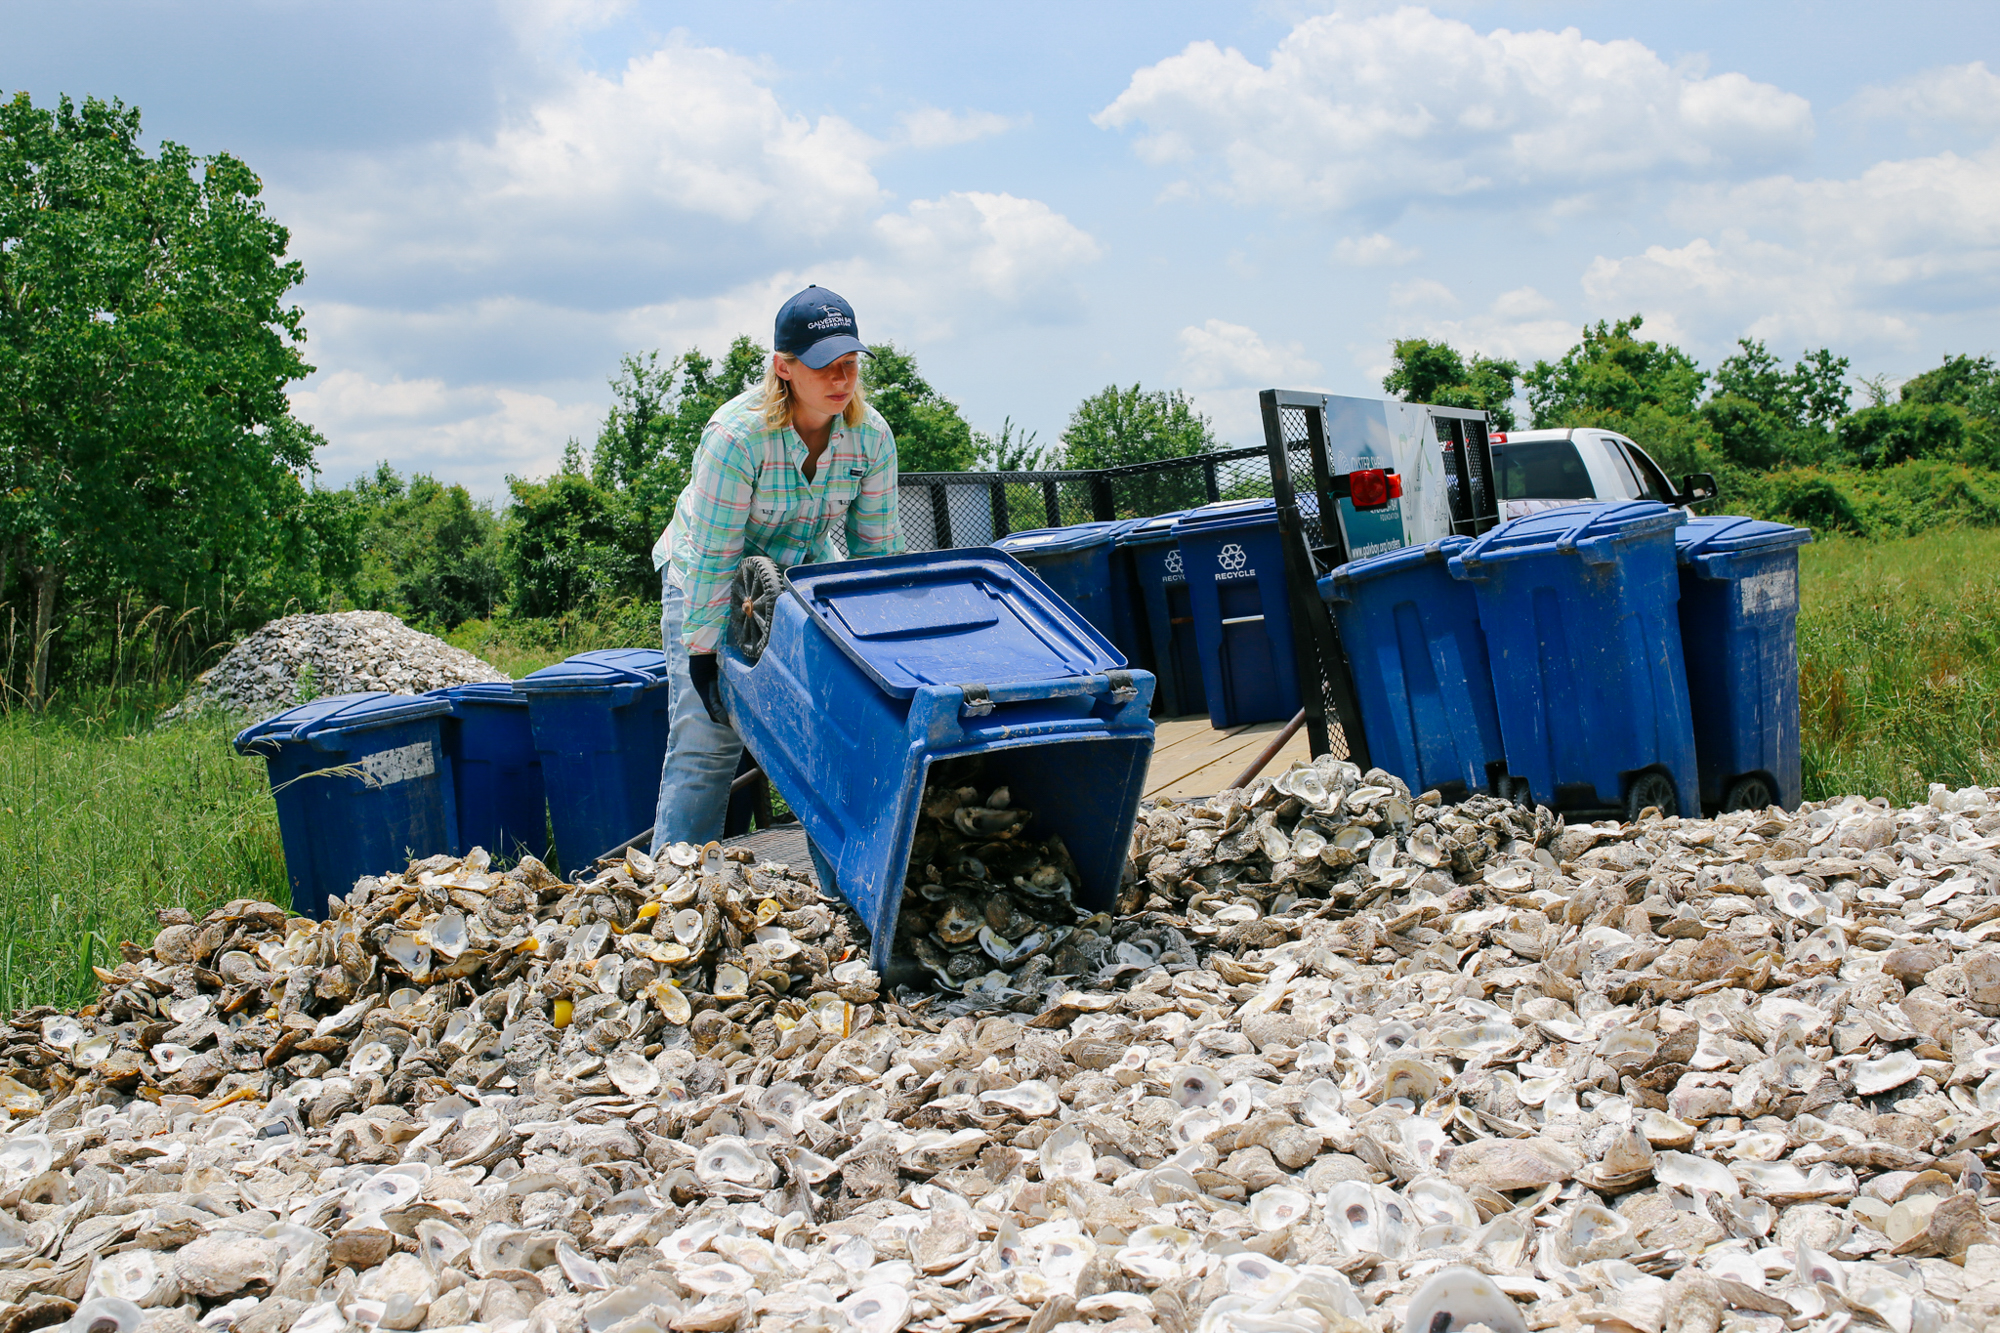 Unloading oyster shells collected from restaurants to cure in the sun. (Photo: Galveston Bay Foundation)